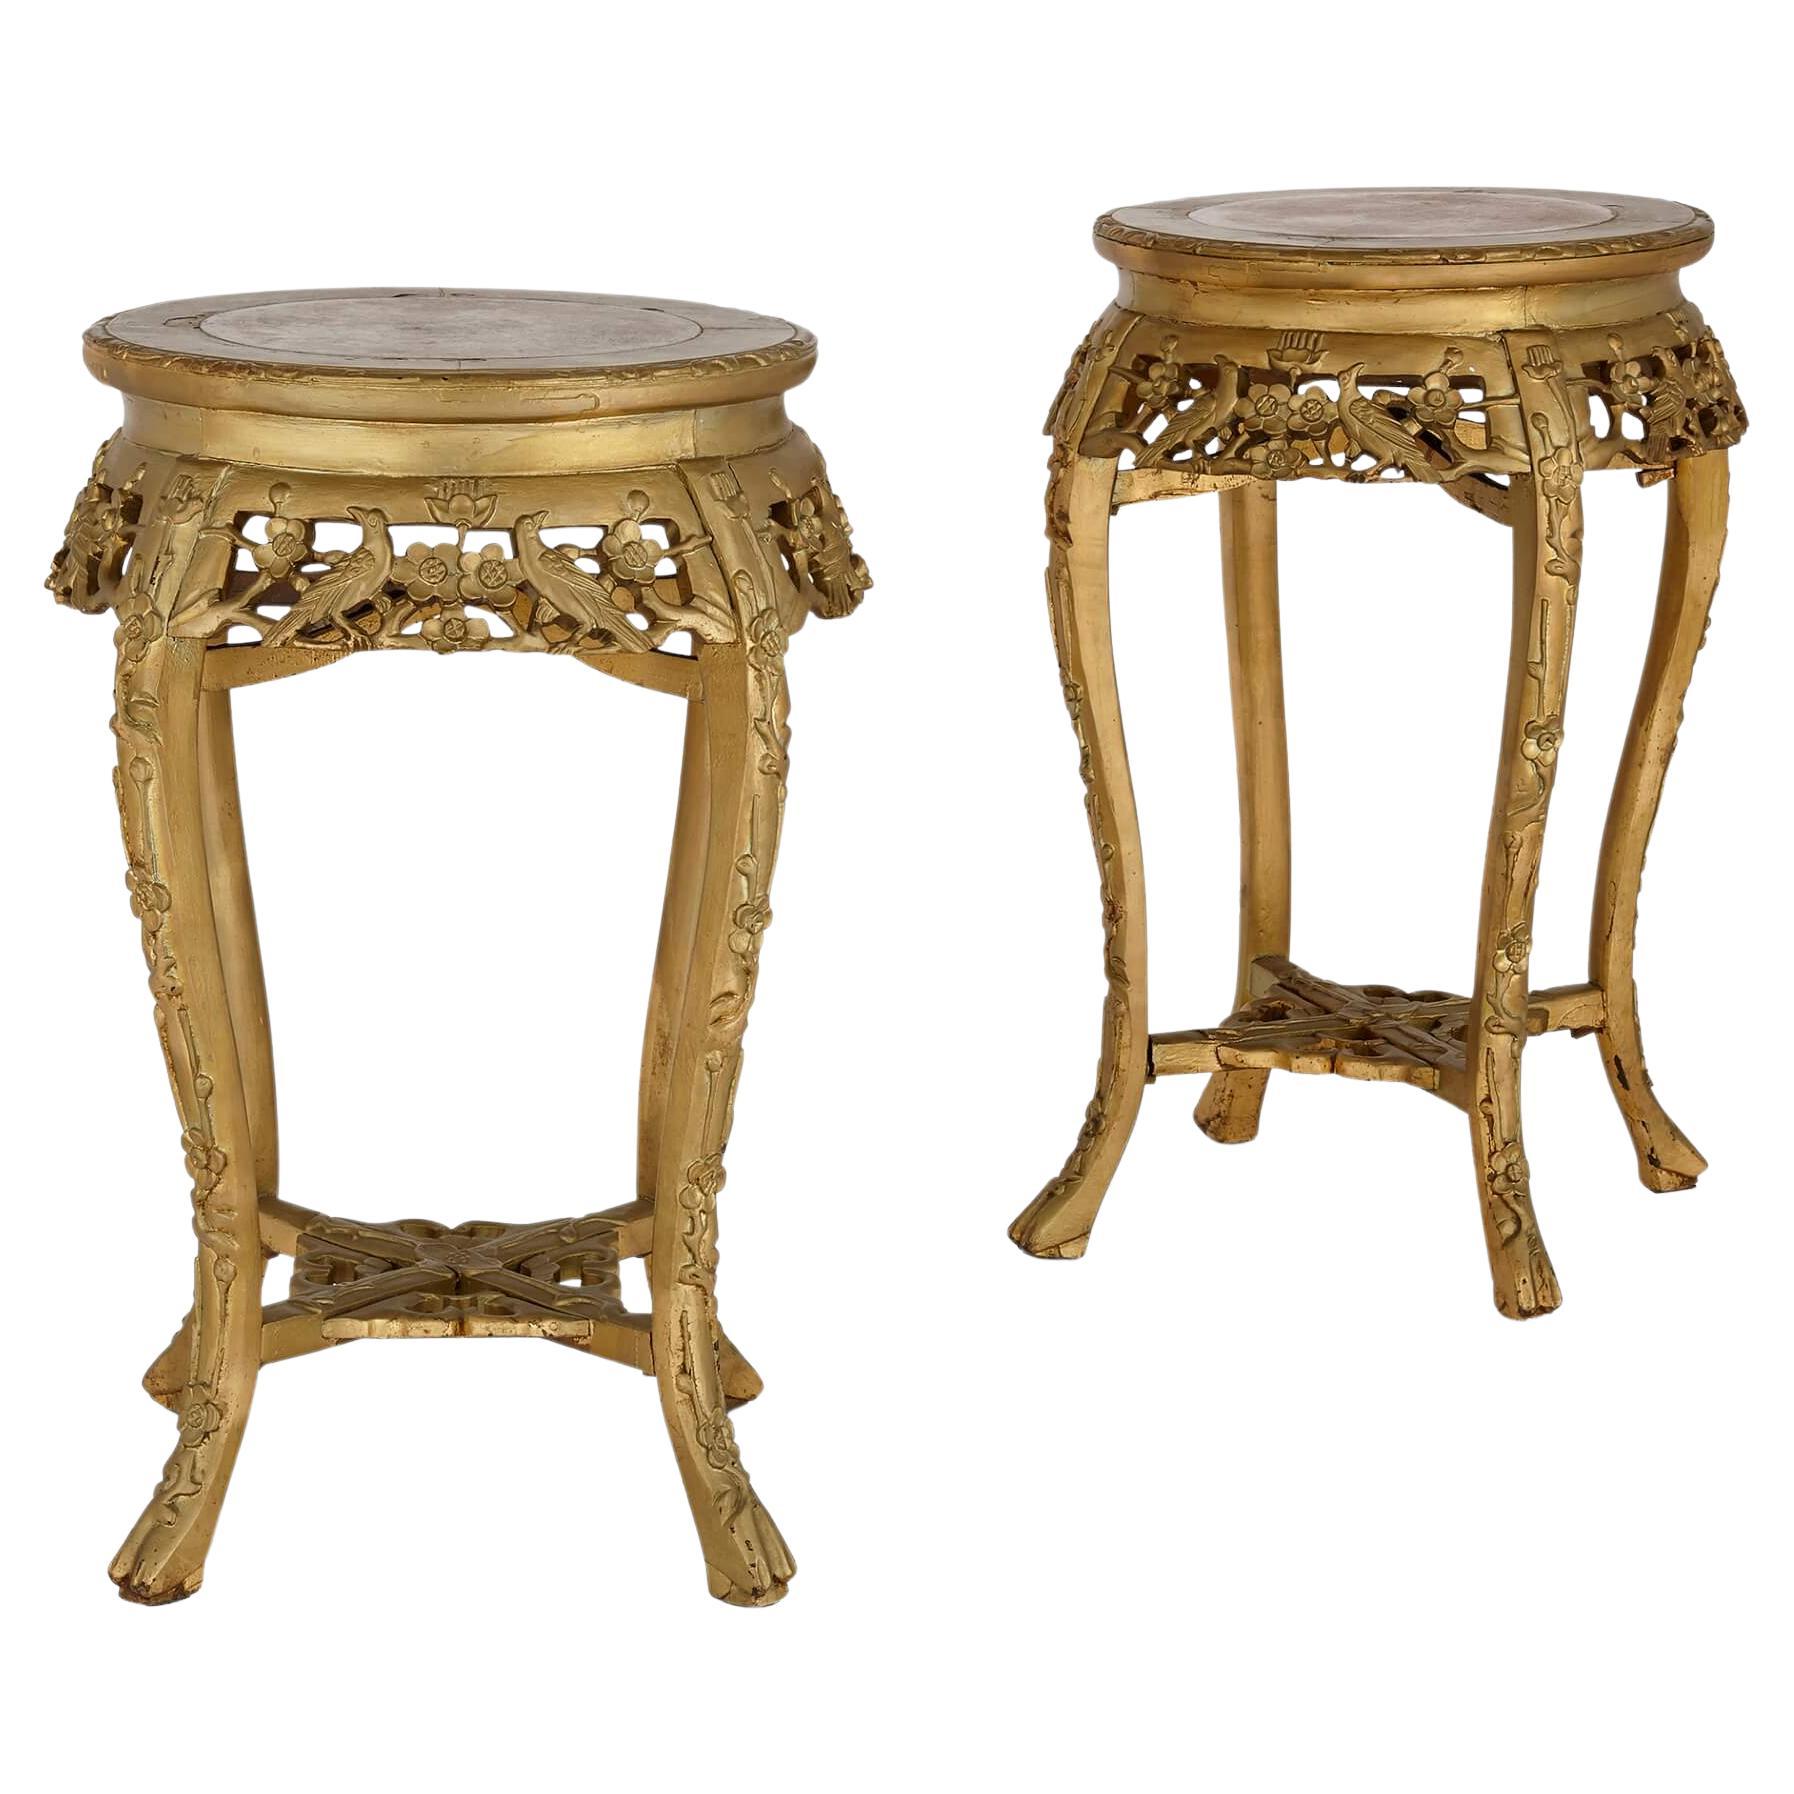 Pair of Giltwood and Marble-Inlay Stands, French, 20th Century